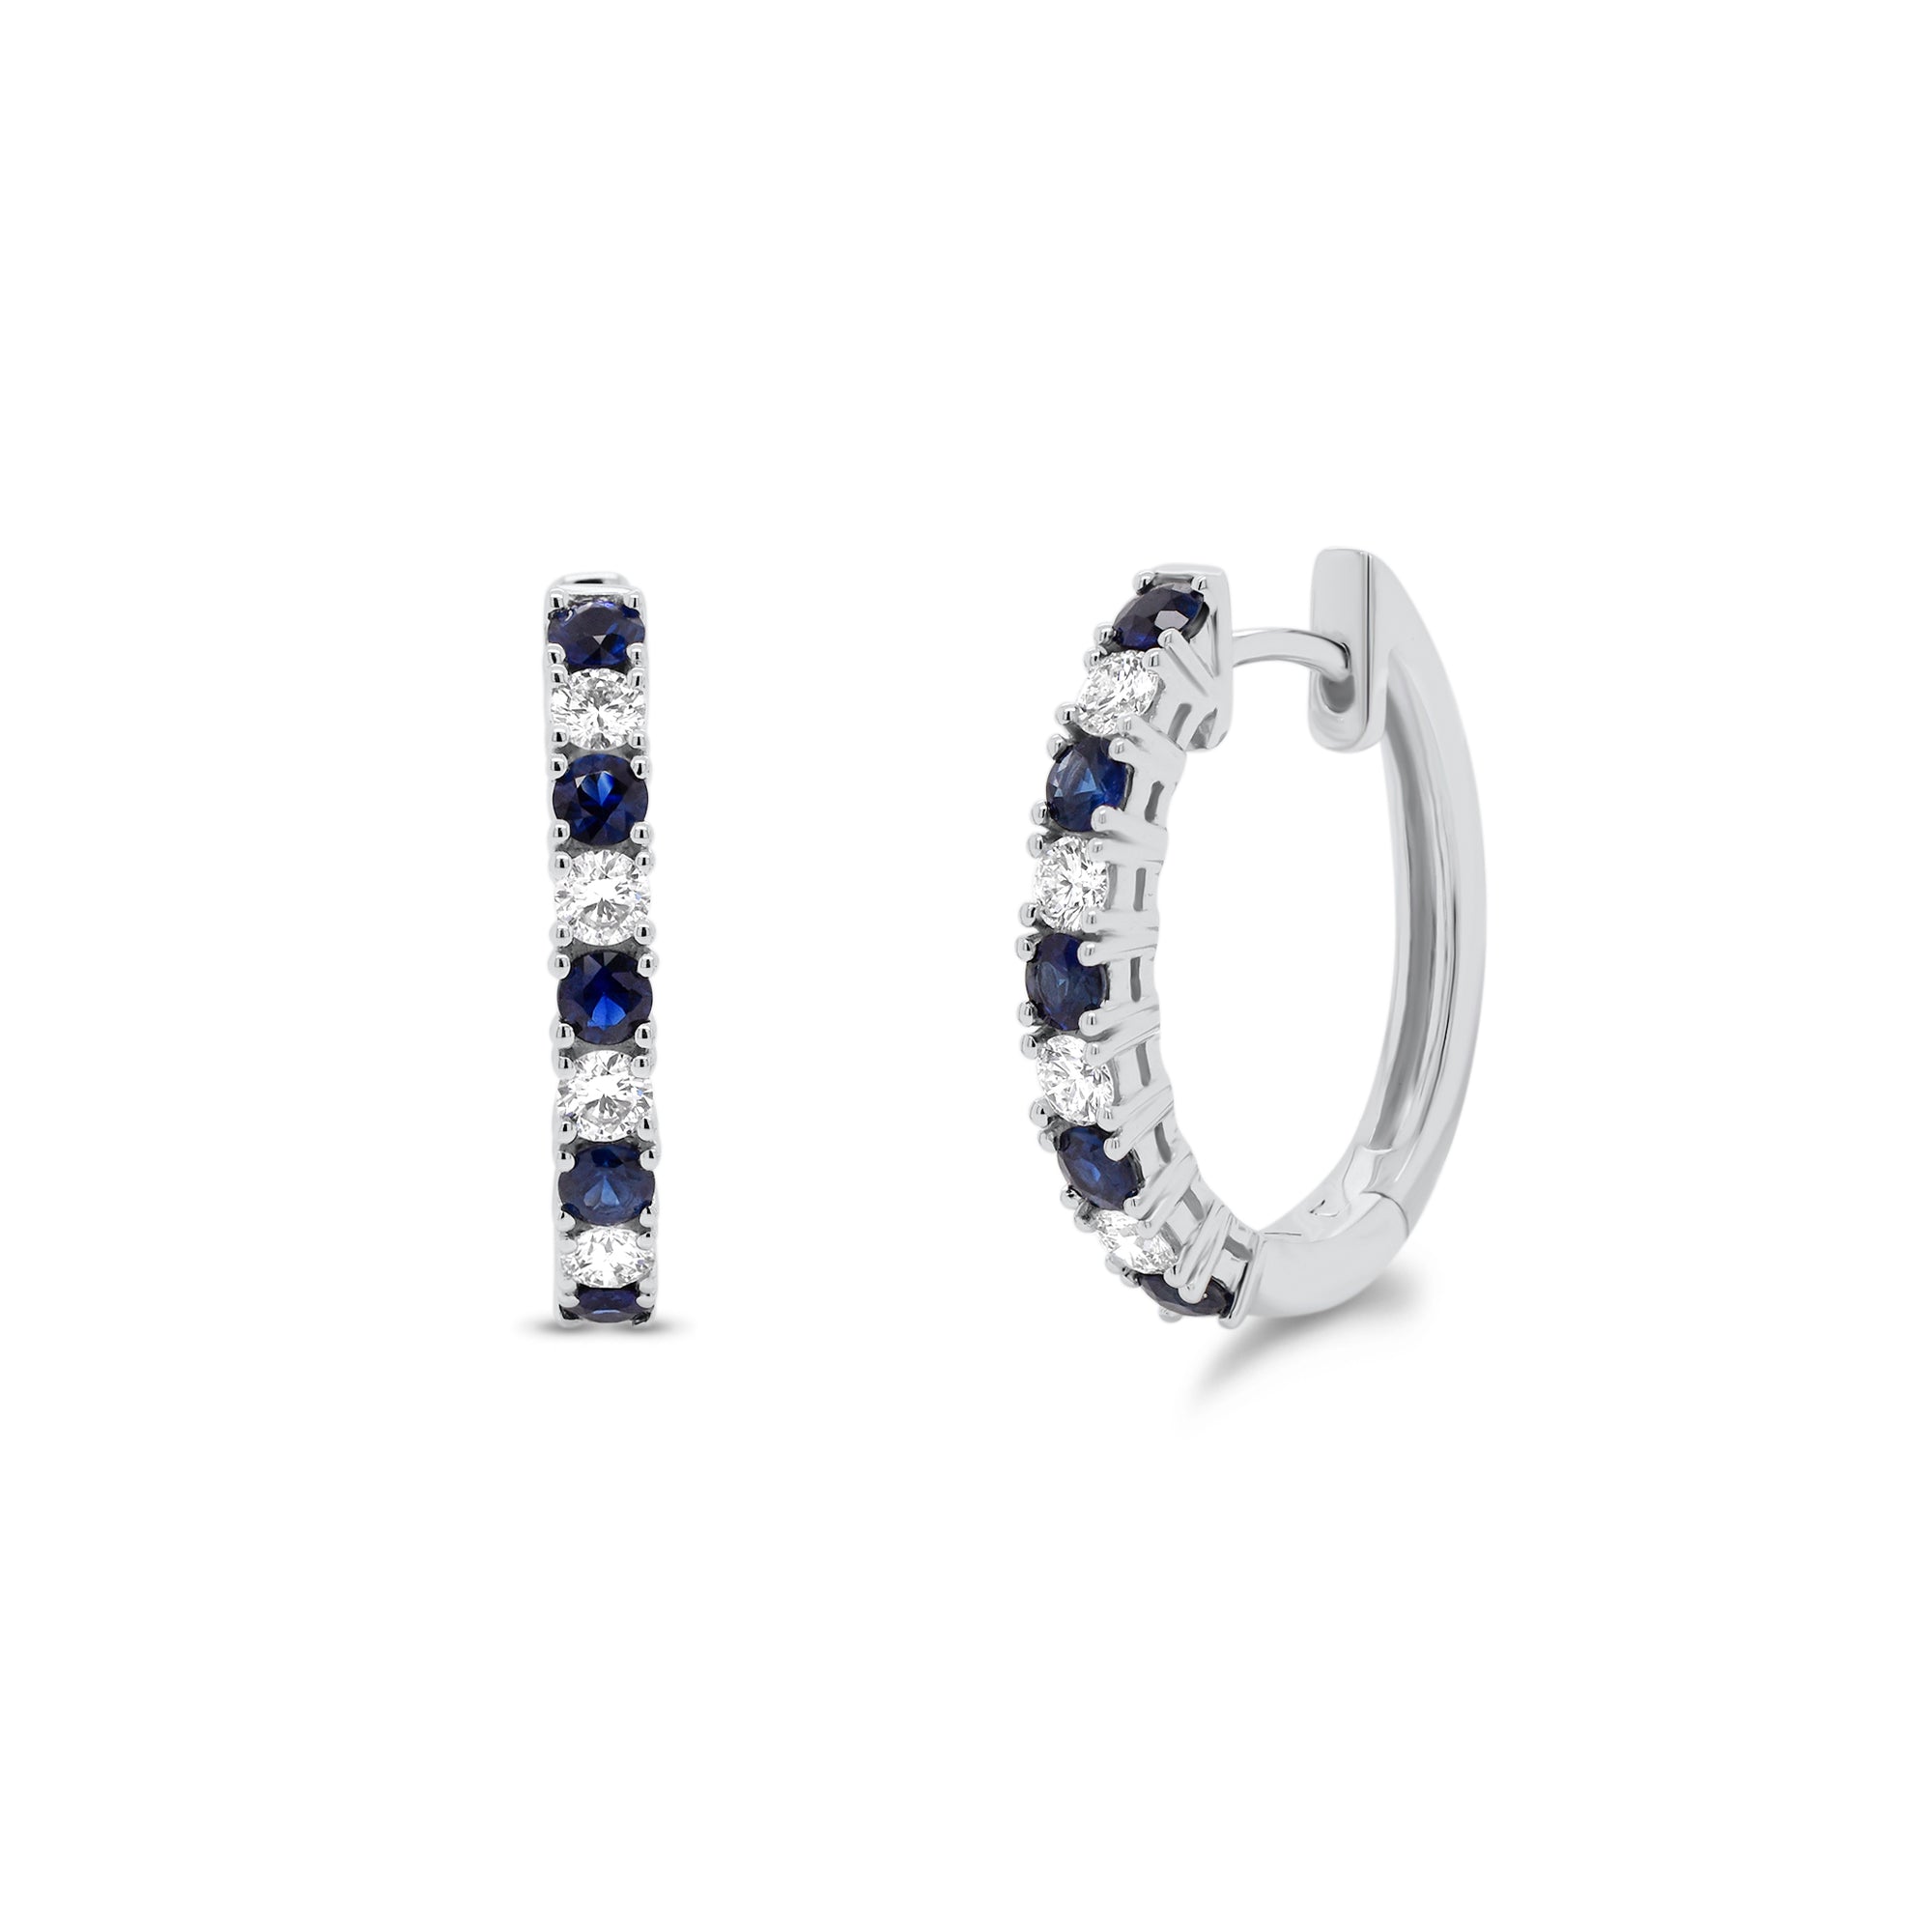 Sapphire & diamond huggie earrings - 18K gold weighing 4.31 grams  - 10 sapphires totaling 0.66 carats  - 8 round diamonds totaling 0.40 carats